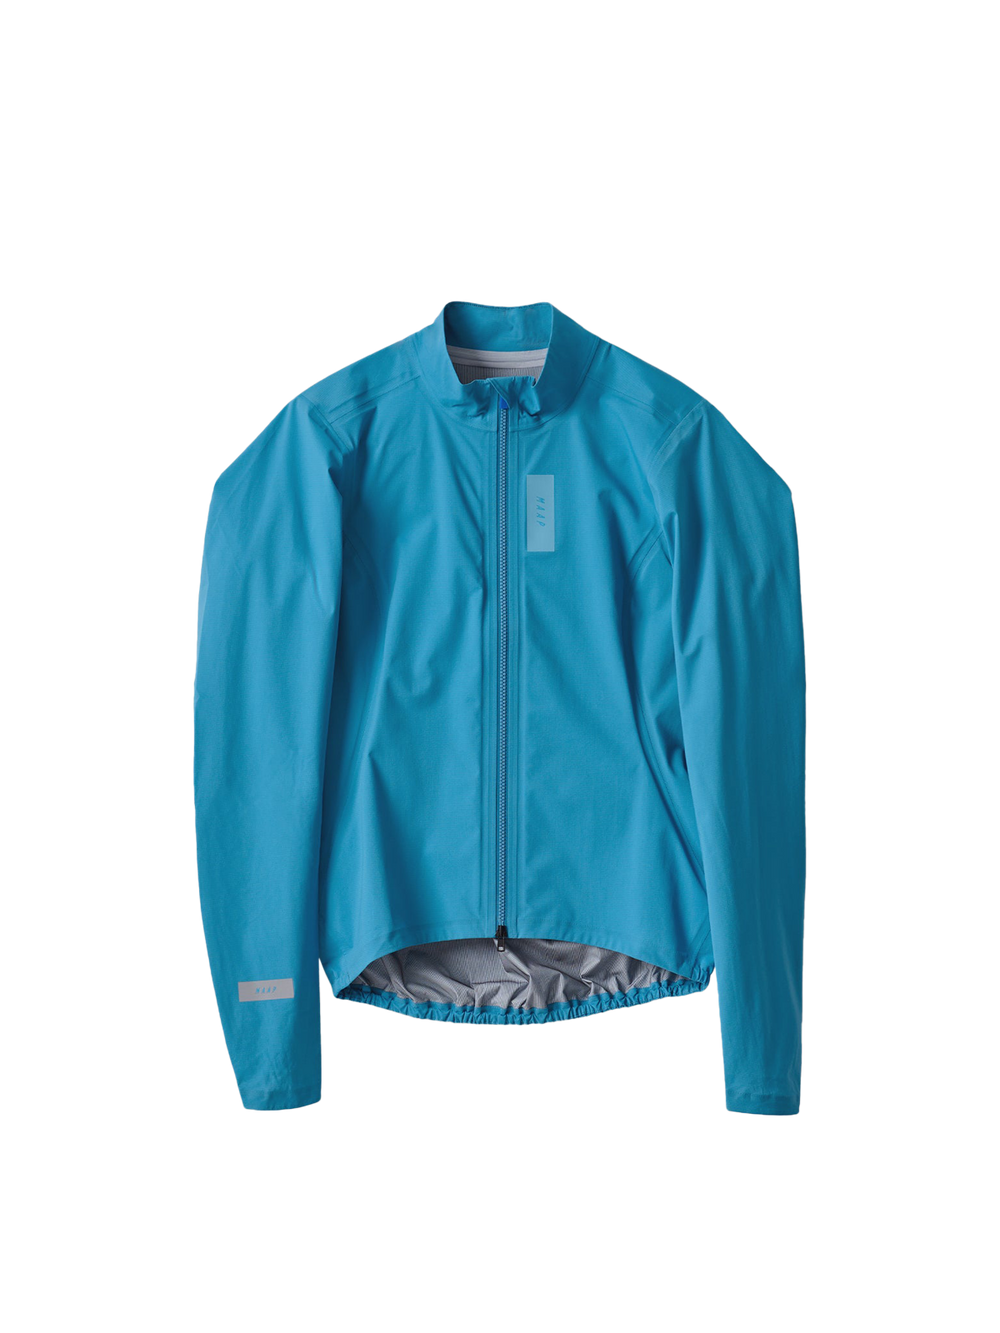 Product Image for Women's Atmos Jacket